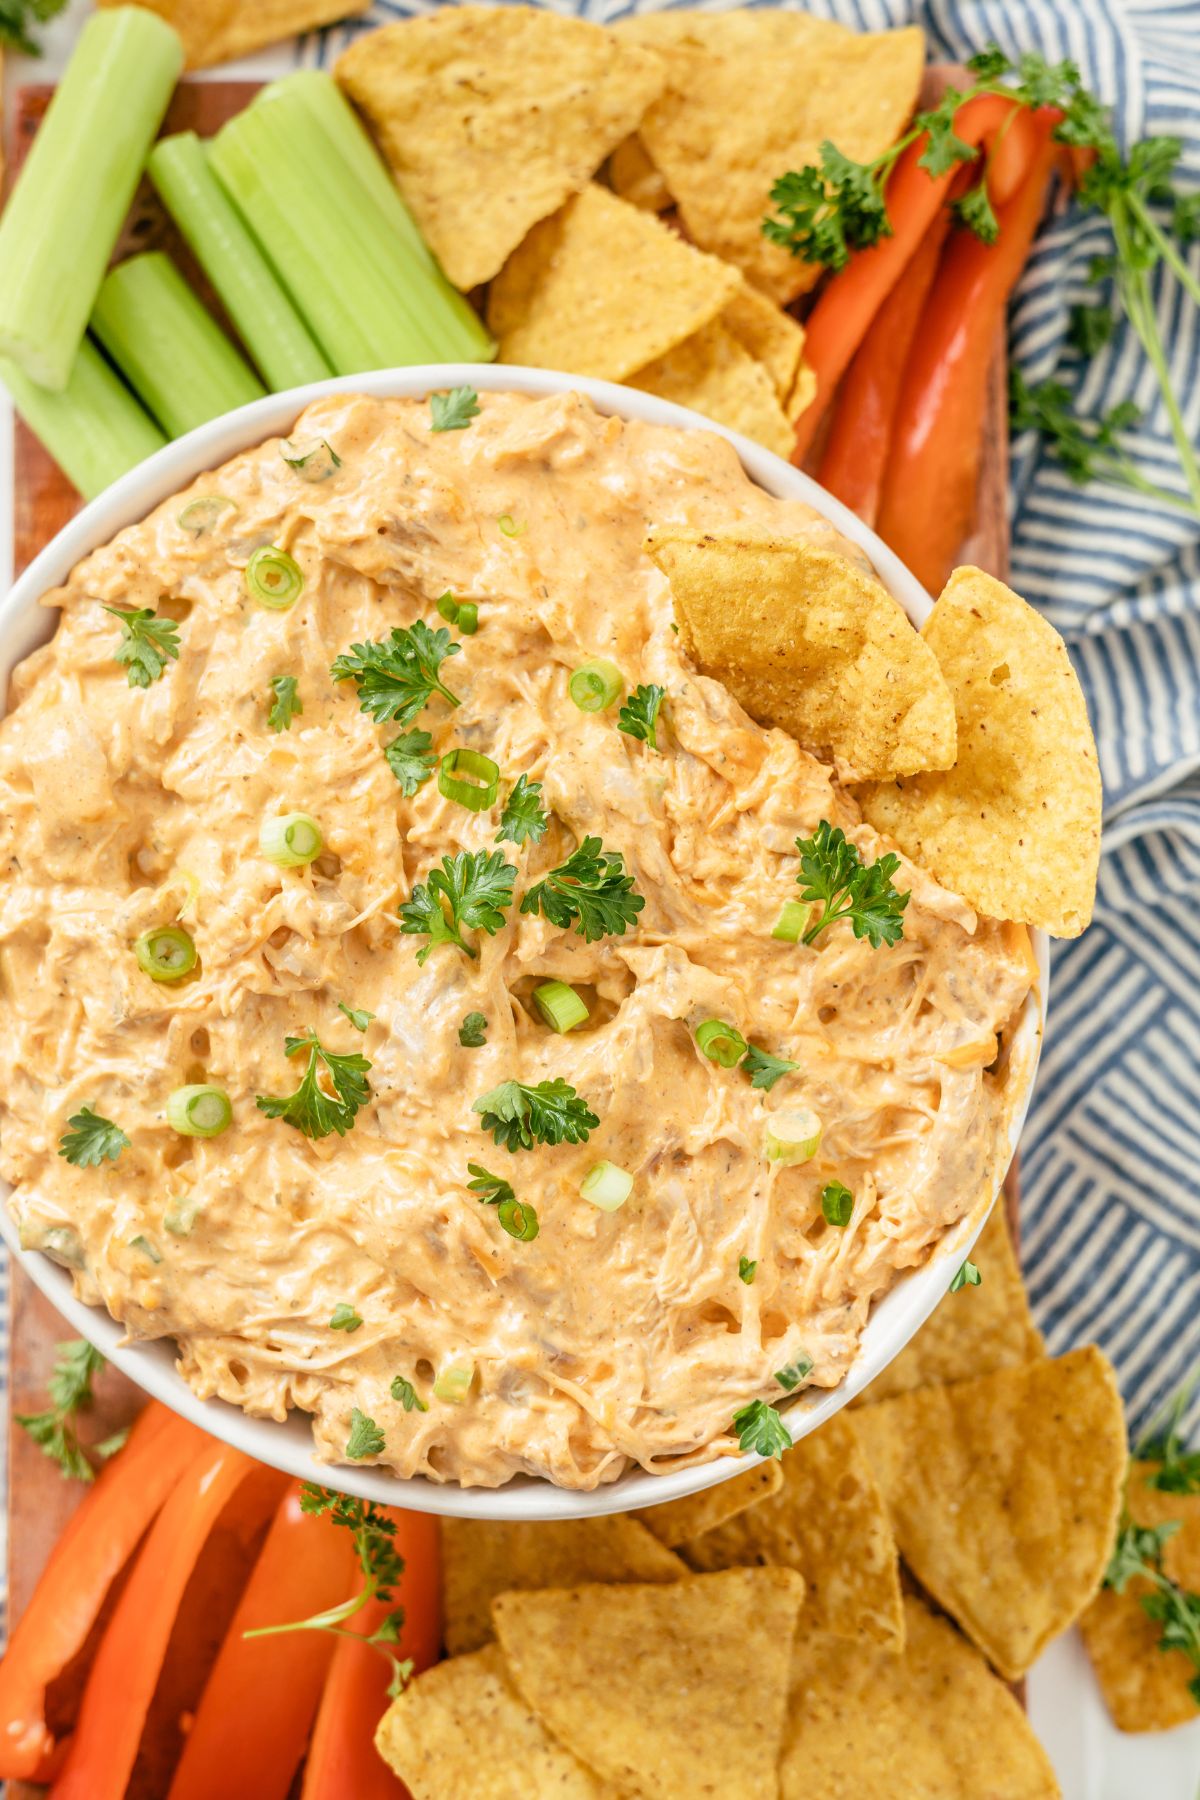 Buffalo Chicken Dip topped with parsley and green onions, surrounded by crispy chips, carrots, and celery for a tempting snack platter